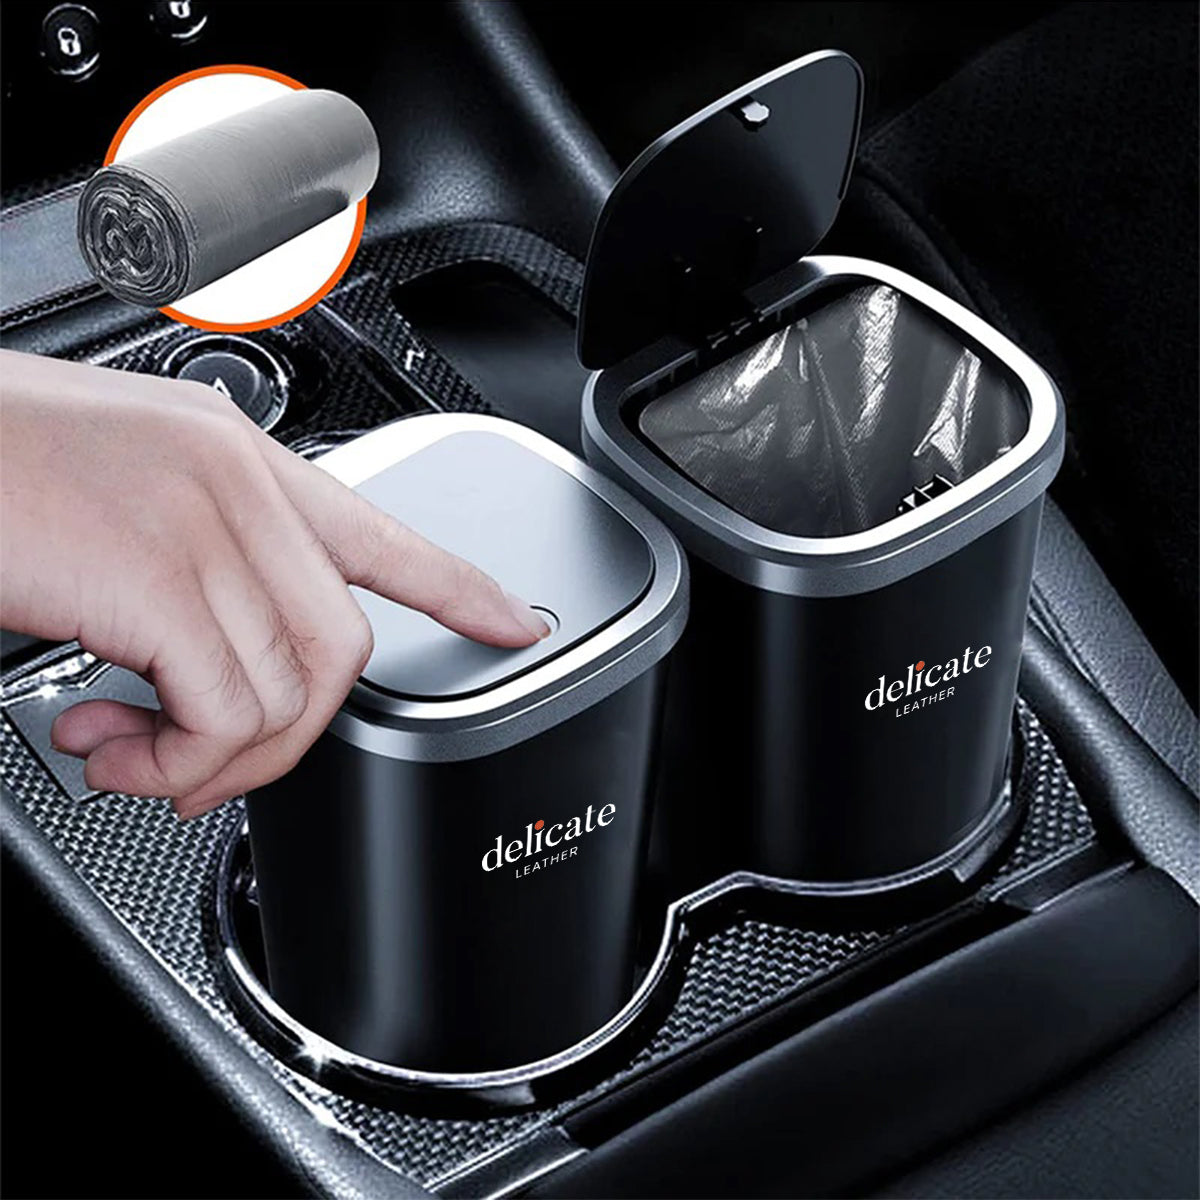 Car Trash Cans, Custom For Your Cars, Compact & Durable Car Accessories for Interior Use 2 Pack, Practical Car Organizers and Storage Cups with Pop-Up Open, Car Accessories SU11993 - Delicate Leather